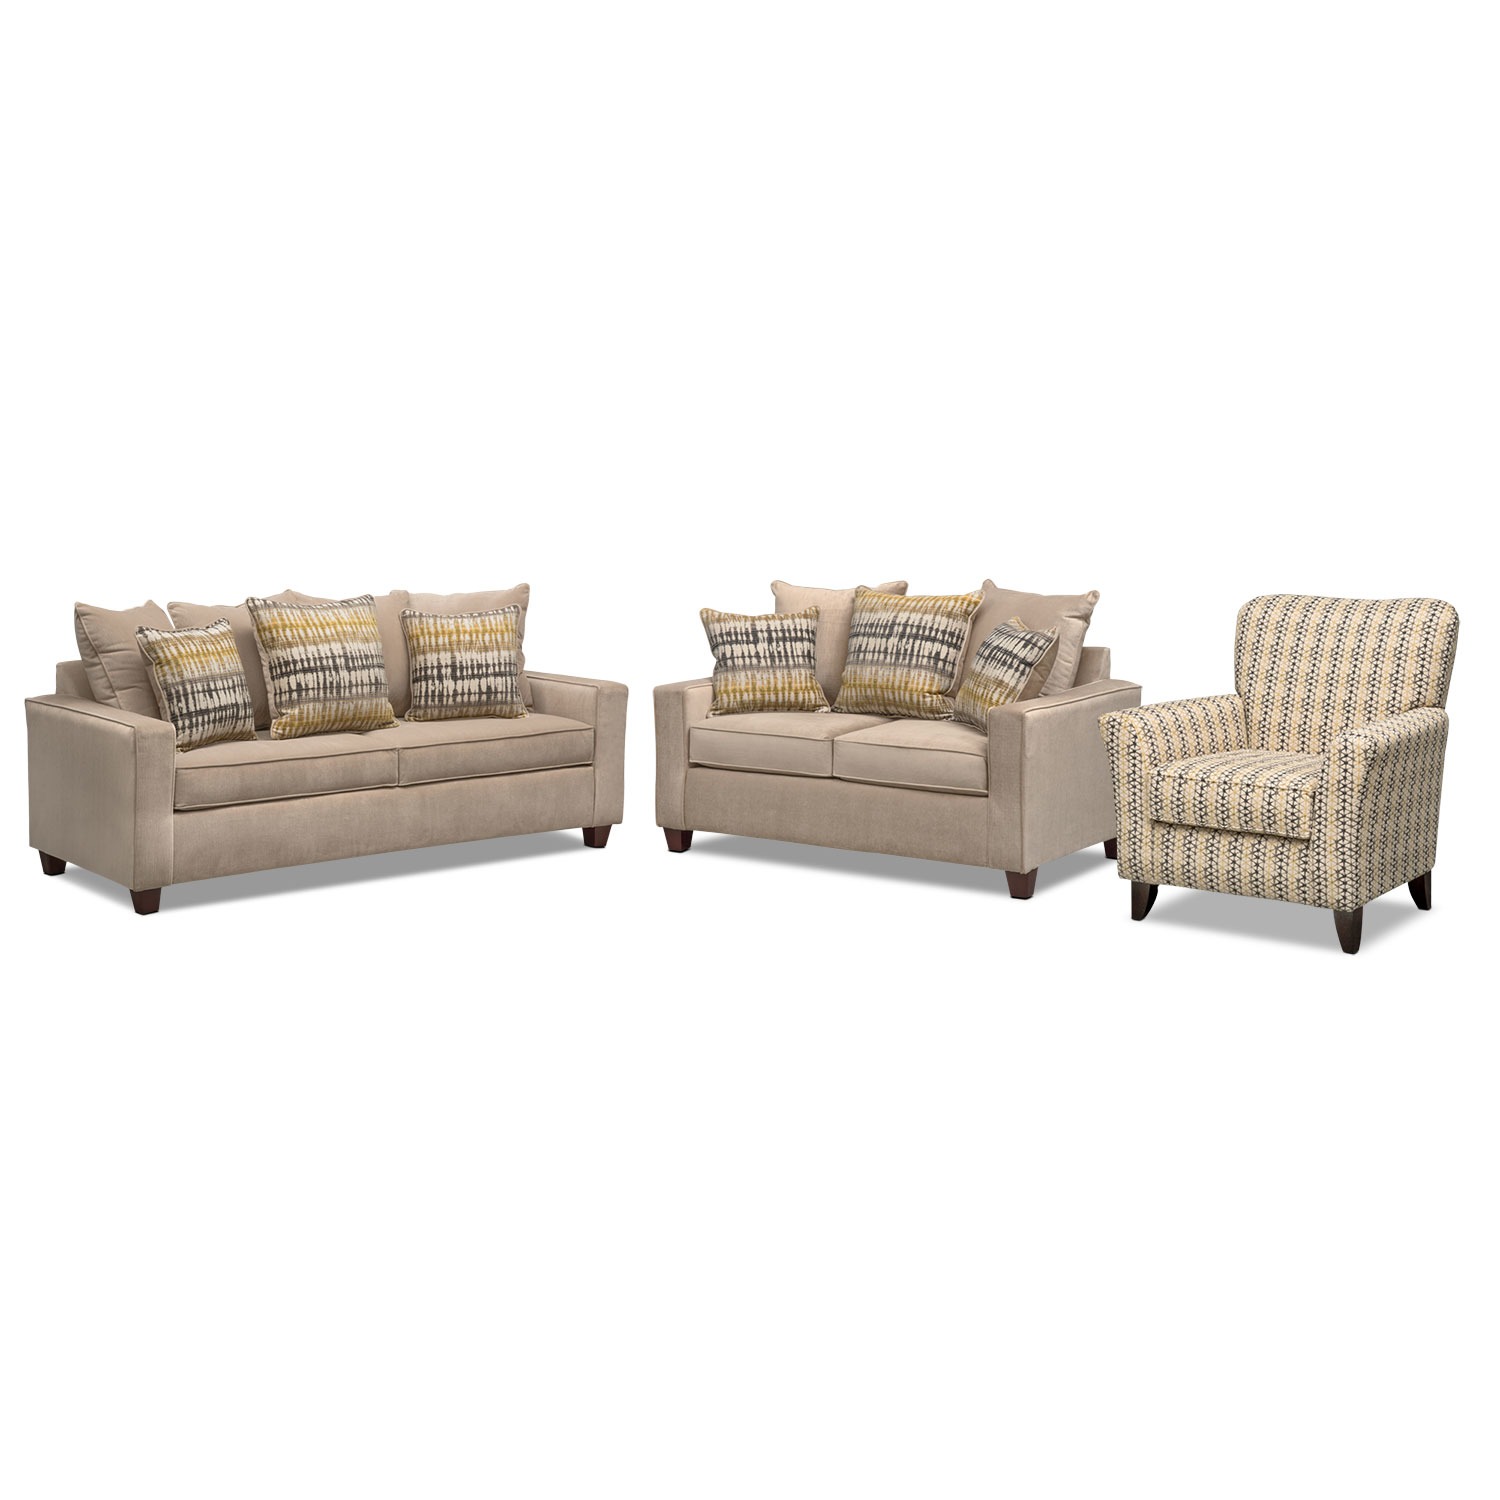 Bryden Sofa, Loveseat and Accent Chair Set | Value City Furniture